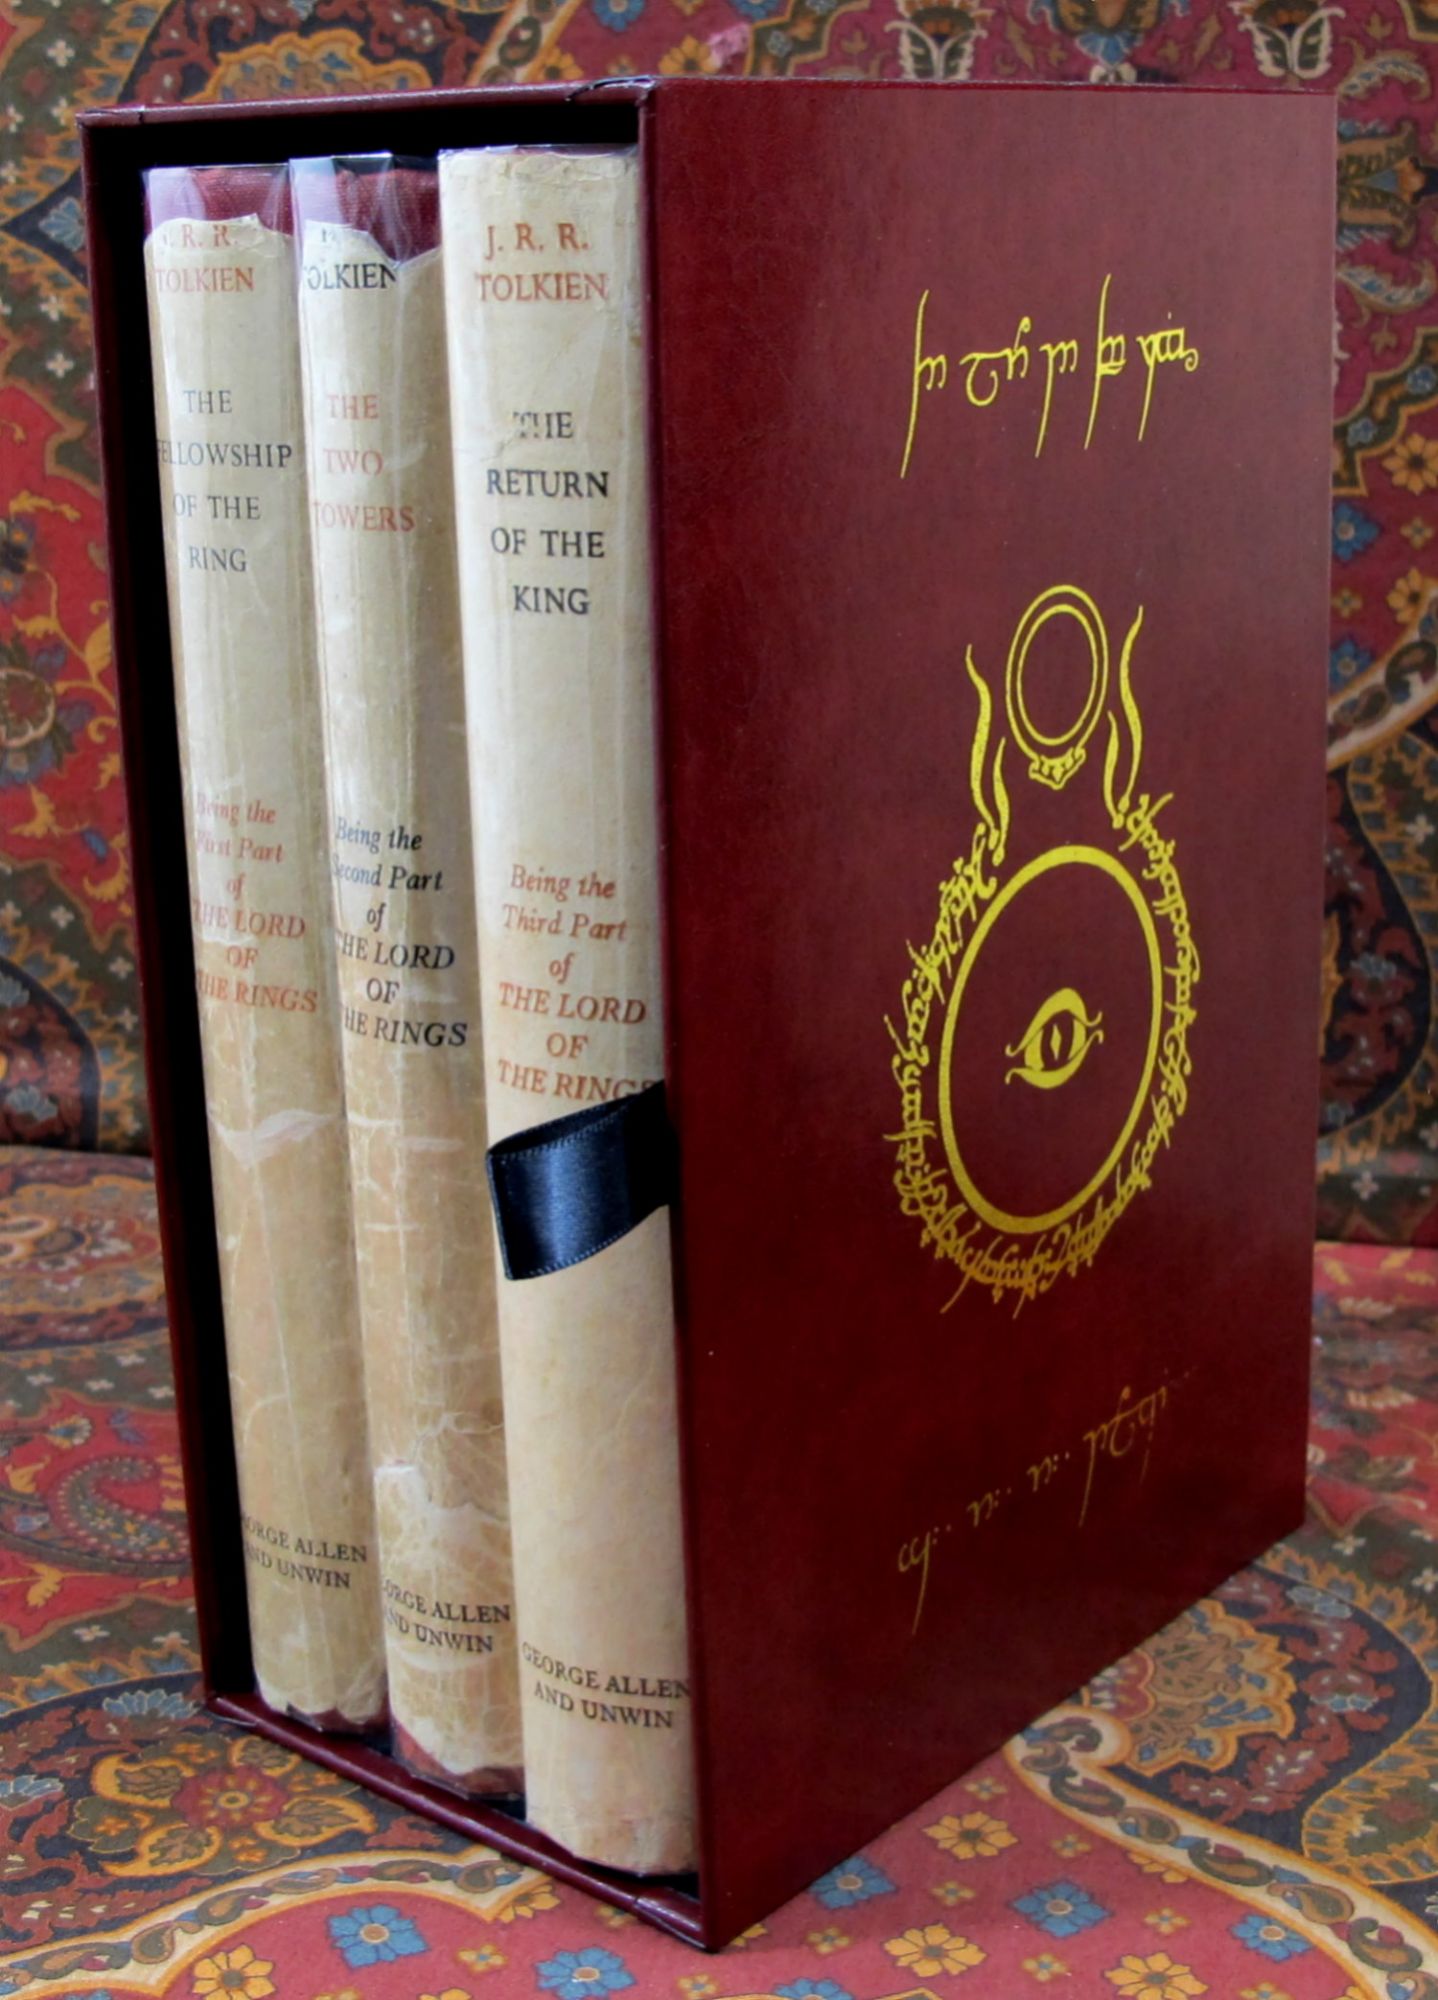 The Lord of the Rings, 1st UK Edition, 1st with Original Dustjackets., And Custom Leather | J. R. R. Tolkien | 1st Hobbits, Lord of the Rings